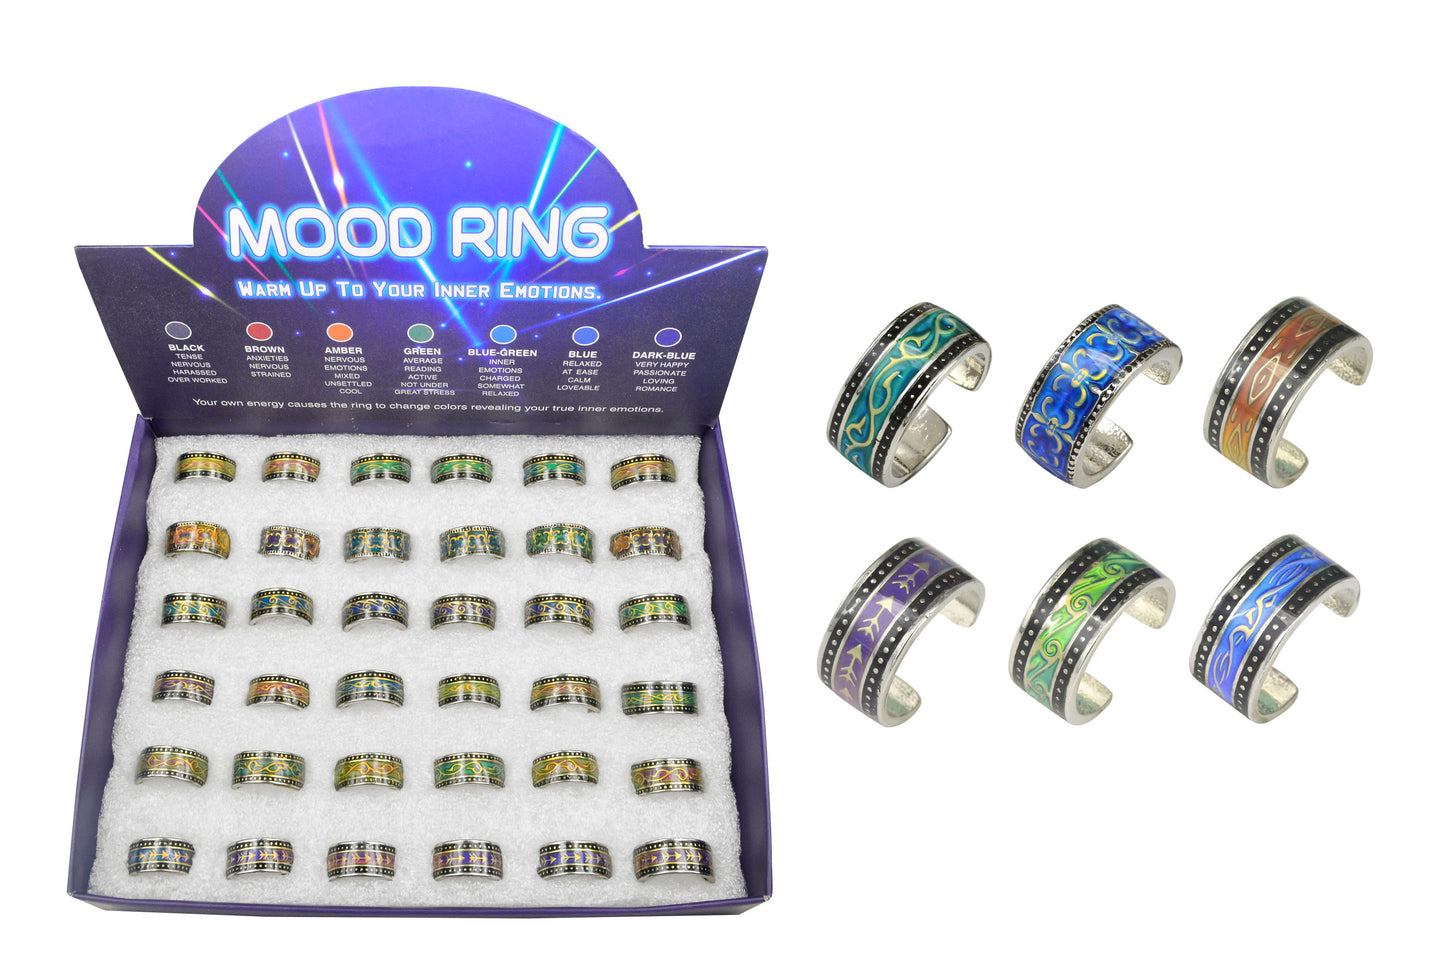 Science Of A Mood Ring: How Do Mood Rings Work?